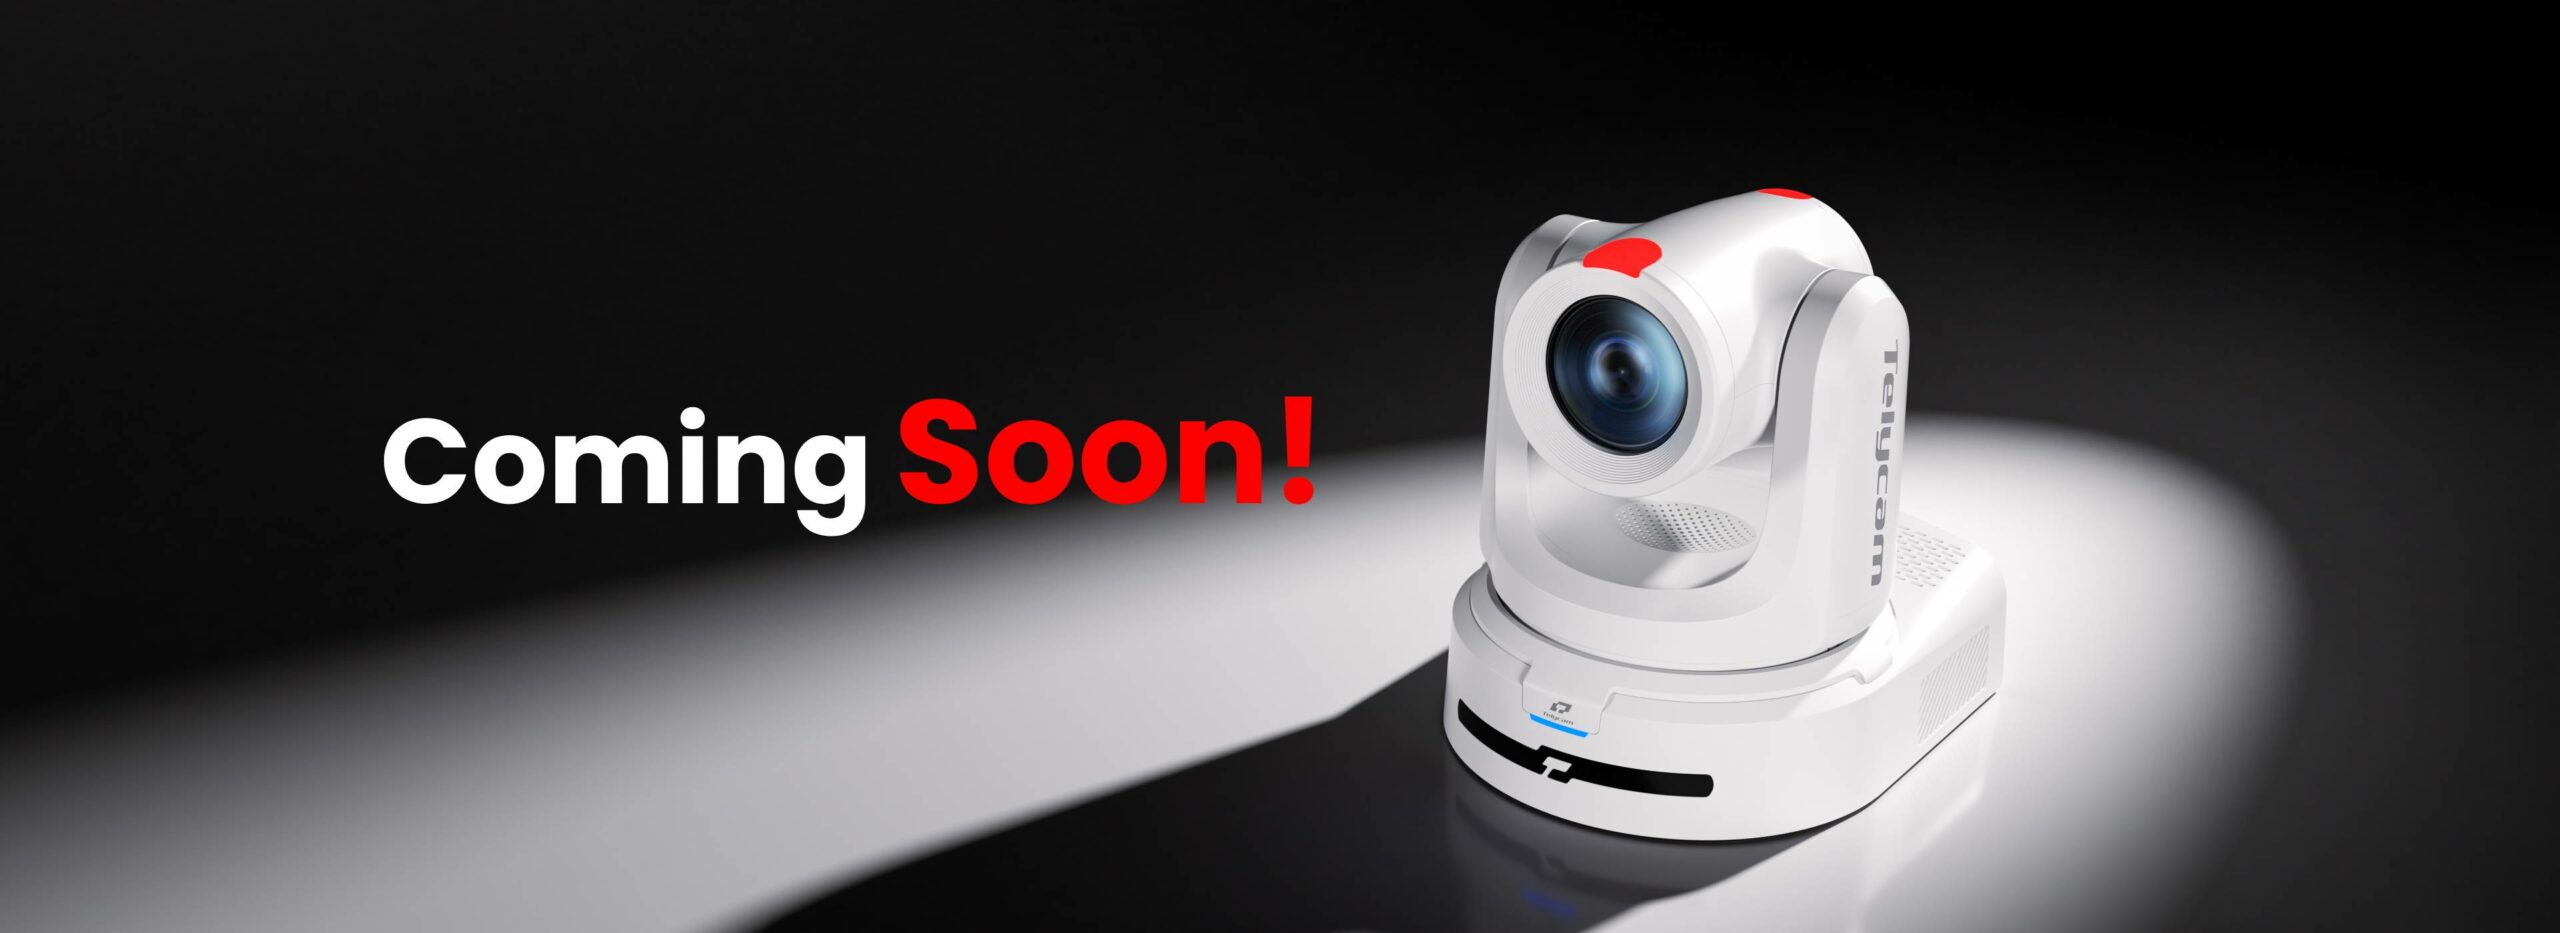 telycam new product coming soon